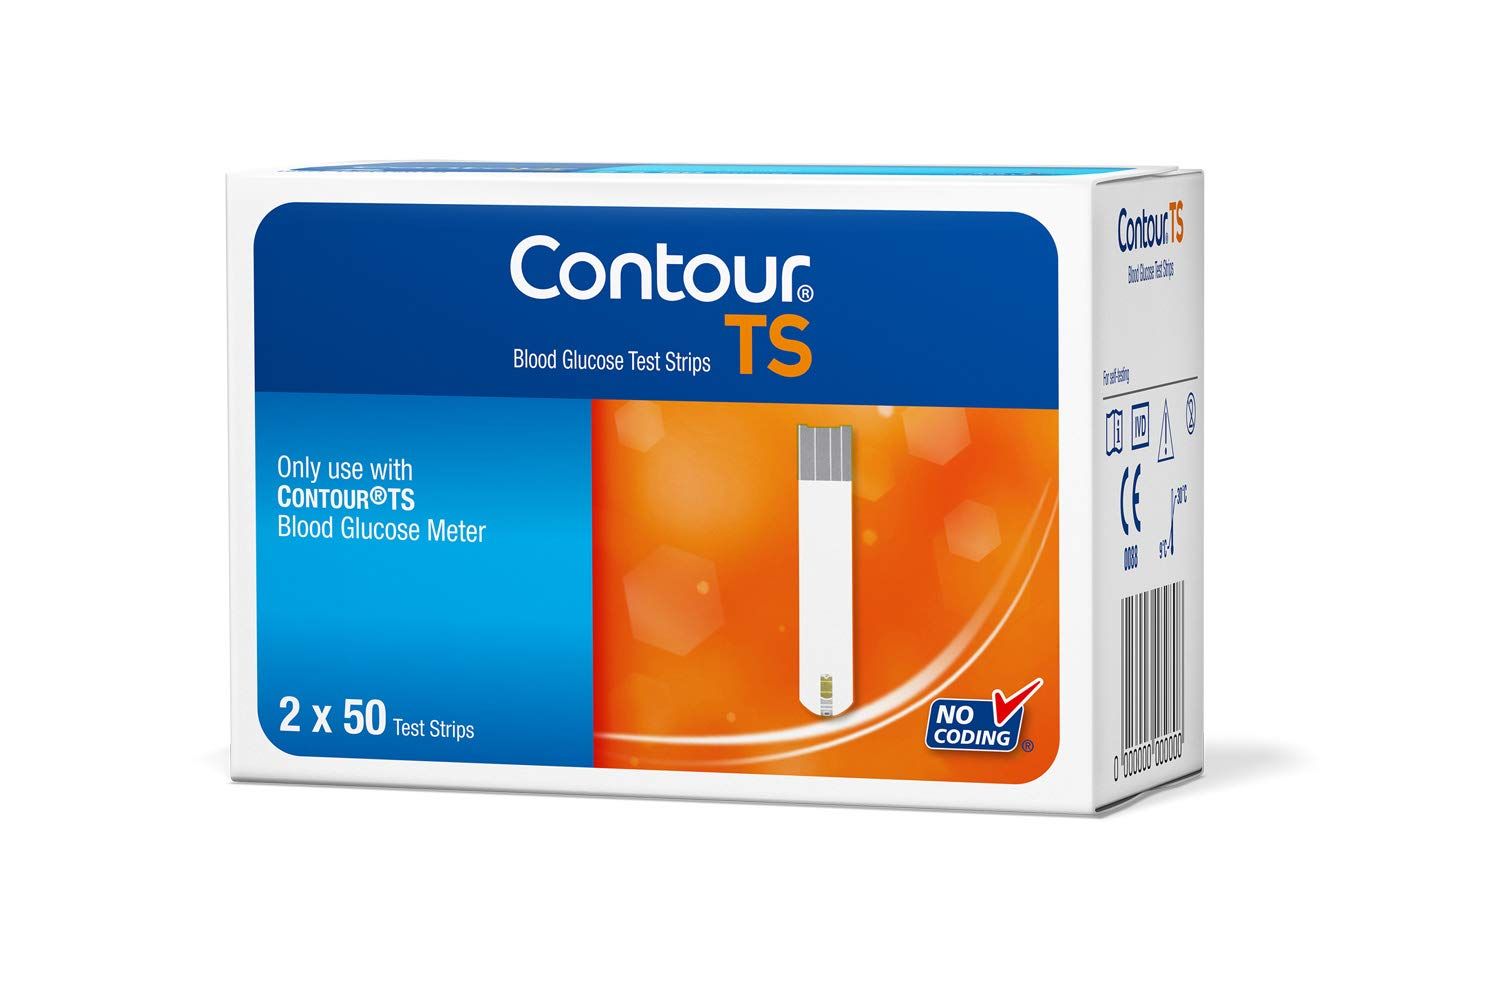 Contour Blood Glucose Test Strips 2x50's, Pack of 1 